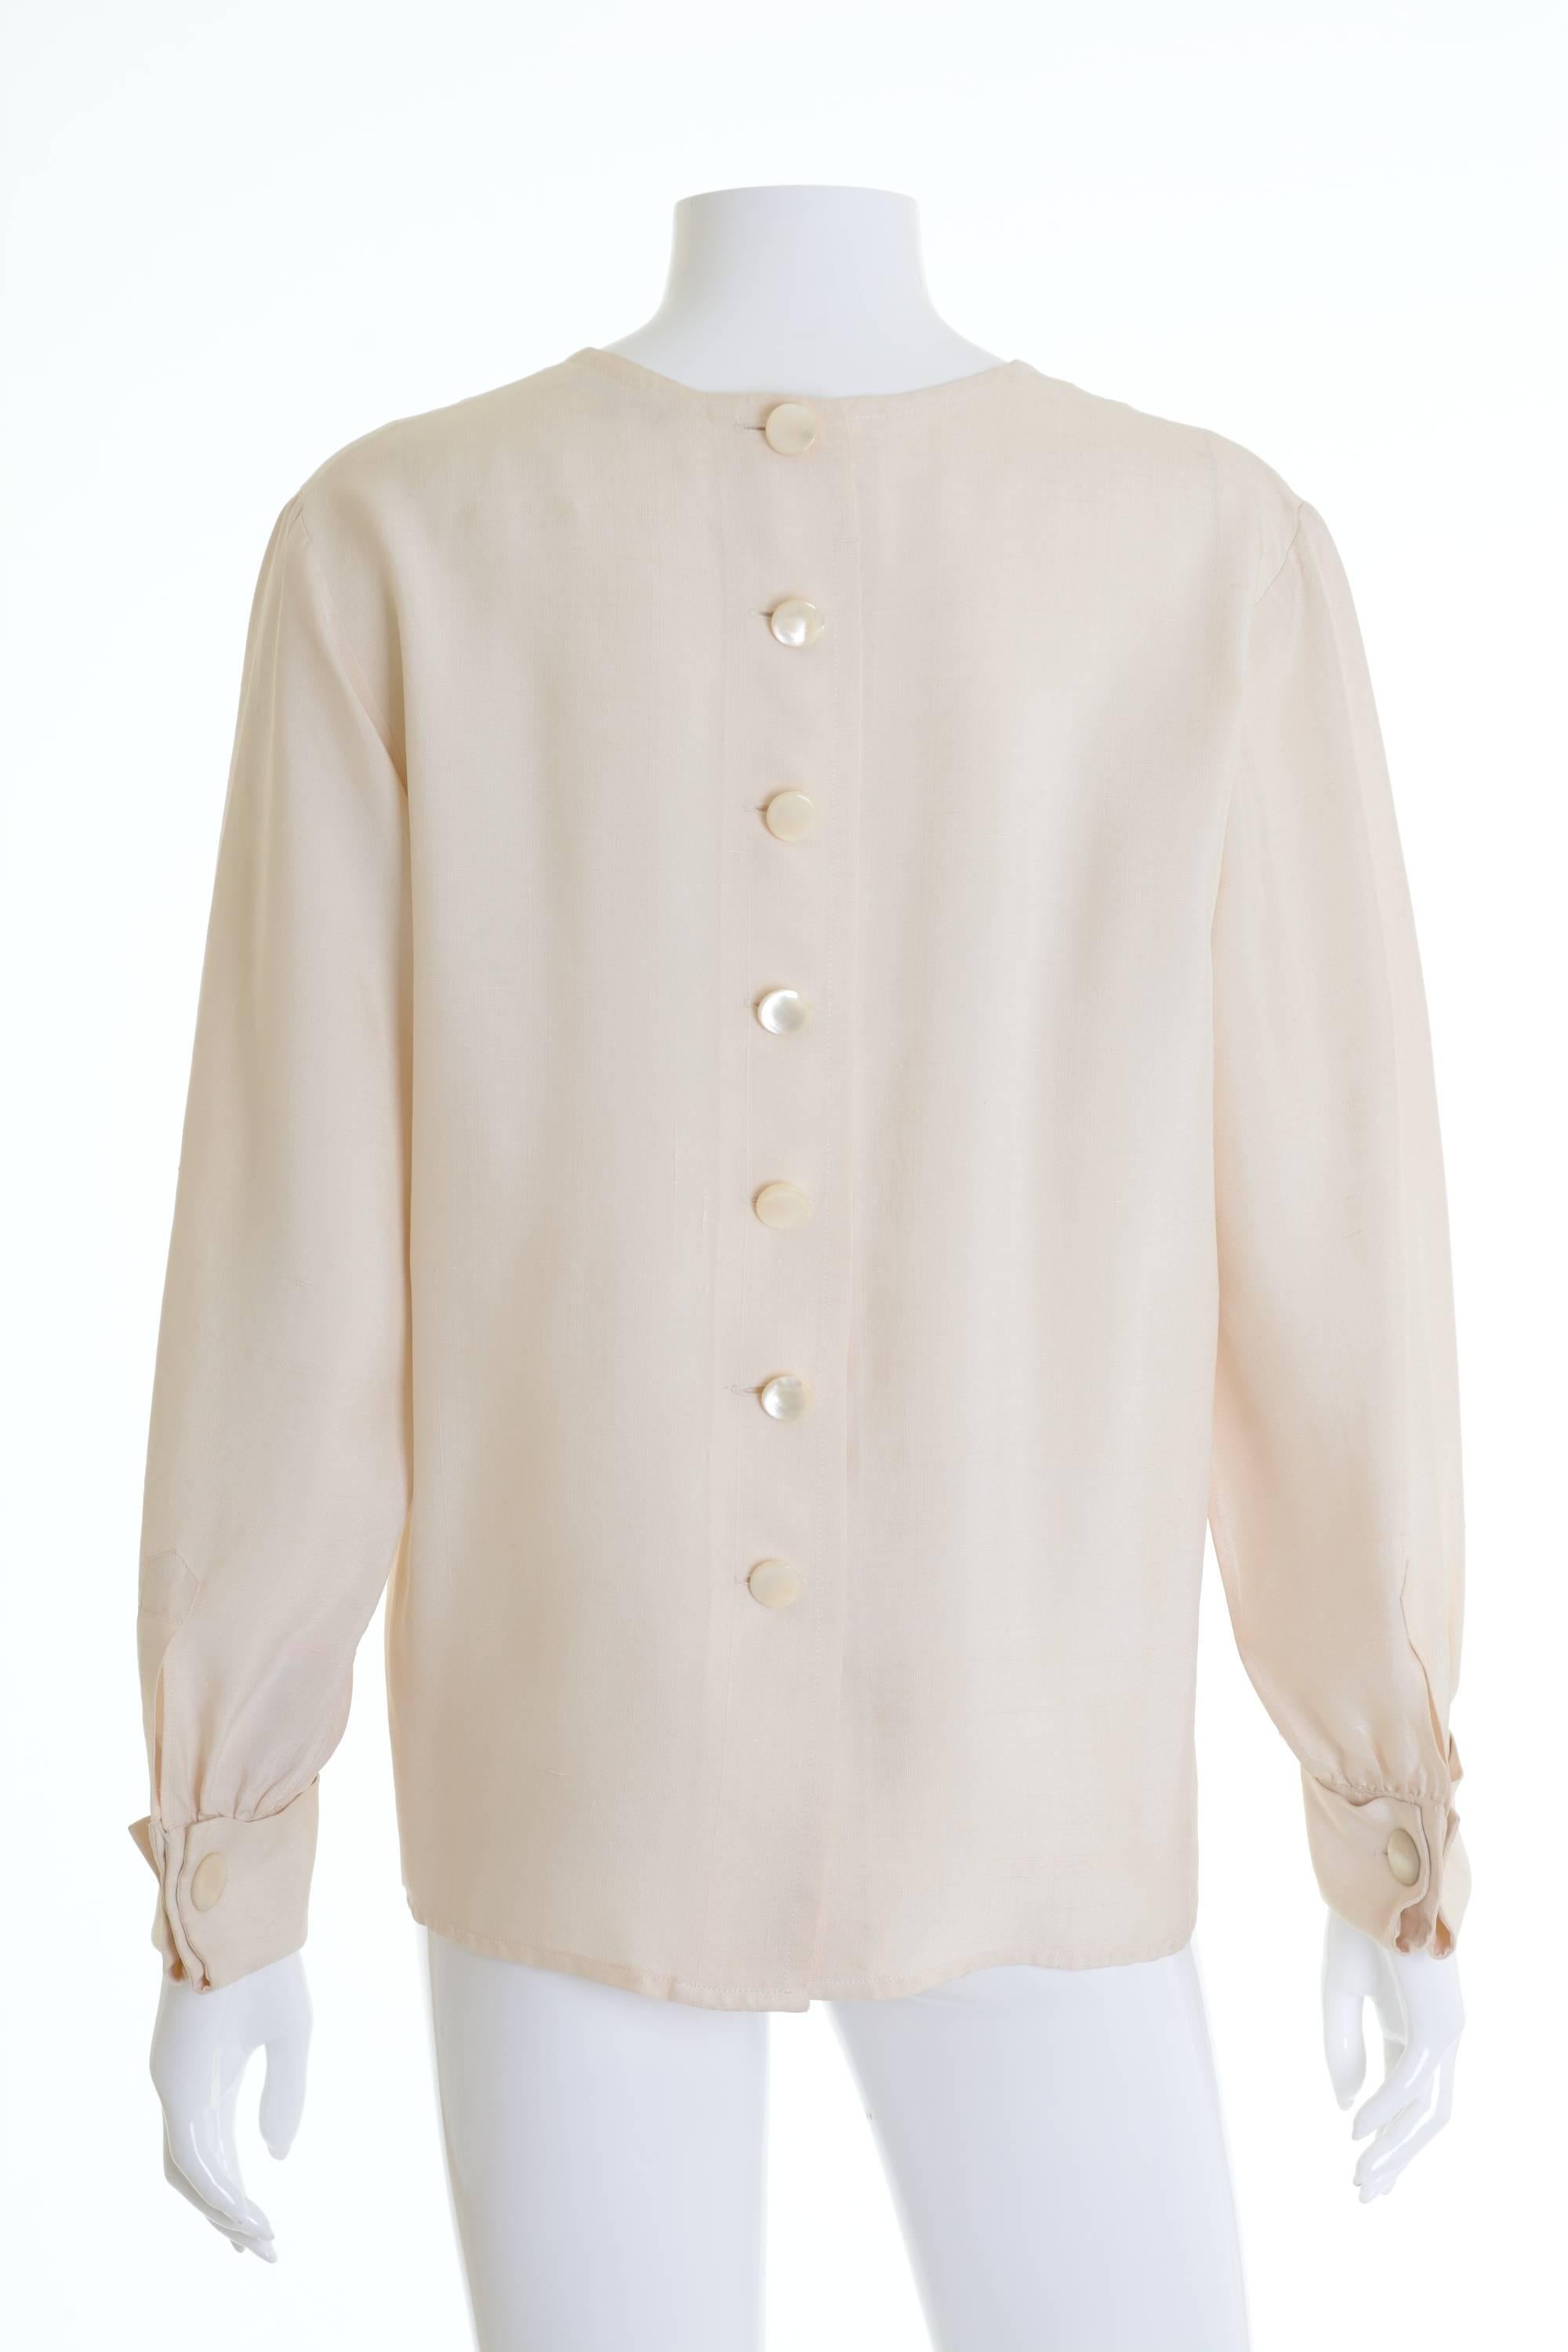 This SAINT LAURENT Rive Gauche 1980s blouse shirt is in a white shantung silk fabric with nacre buttons on the back. It has nacre cufflinks and long sleeves. 

Very good vintage condition

Label: Saint Laurent Rive Gauche (made in France)
Fabric: